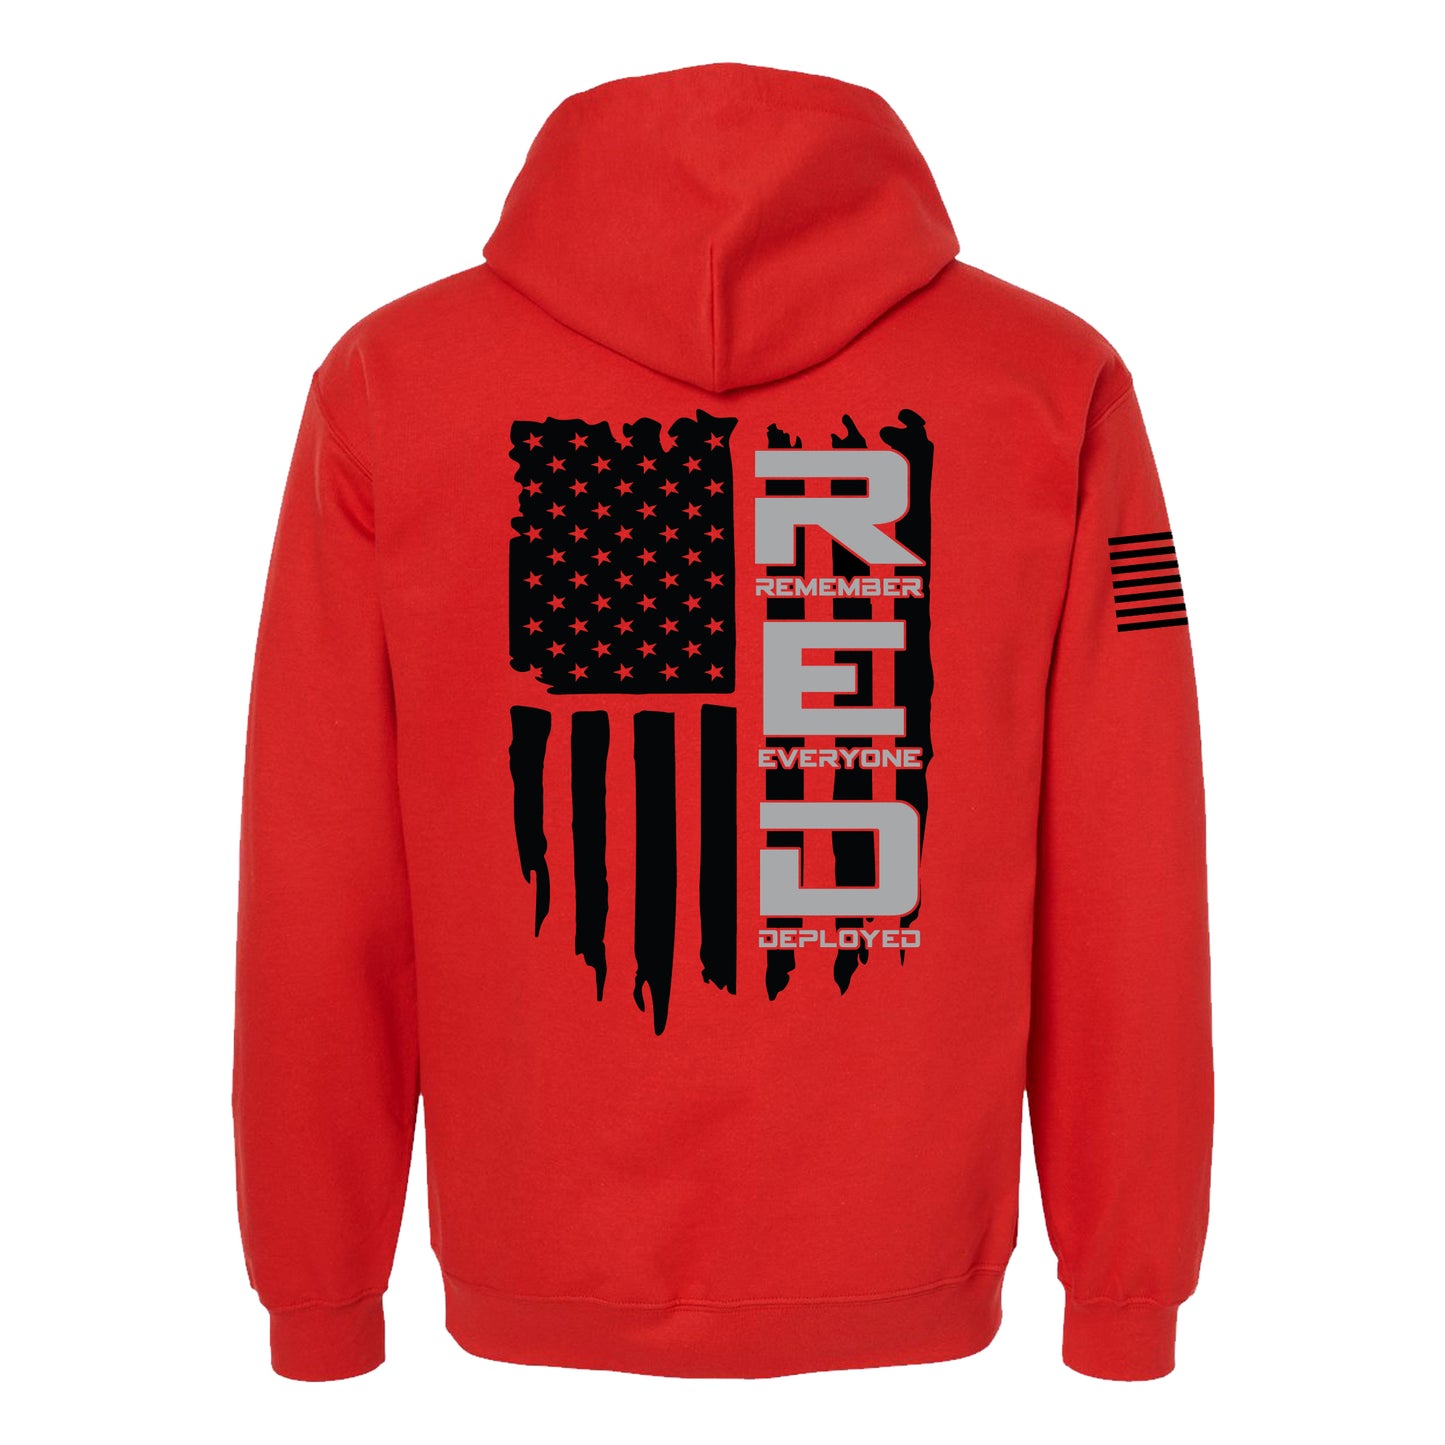 Remember Everyone Deployed (R.E.D.) American Flag, SoftStyle Hoodie, Red